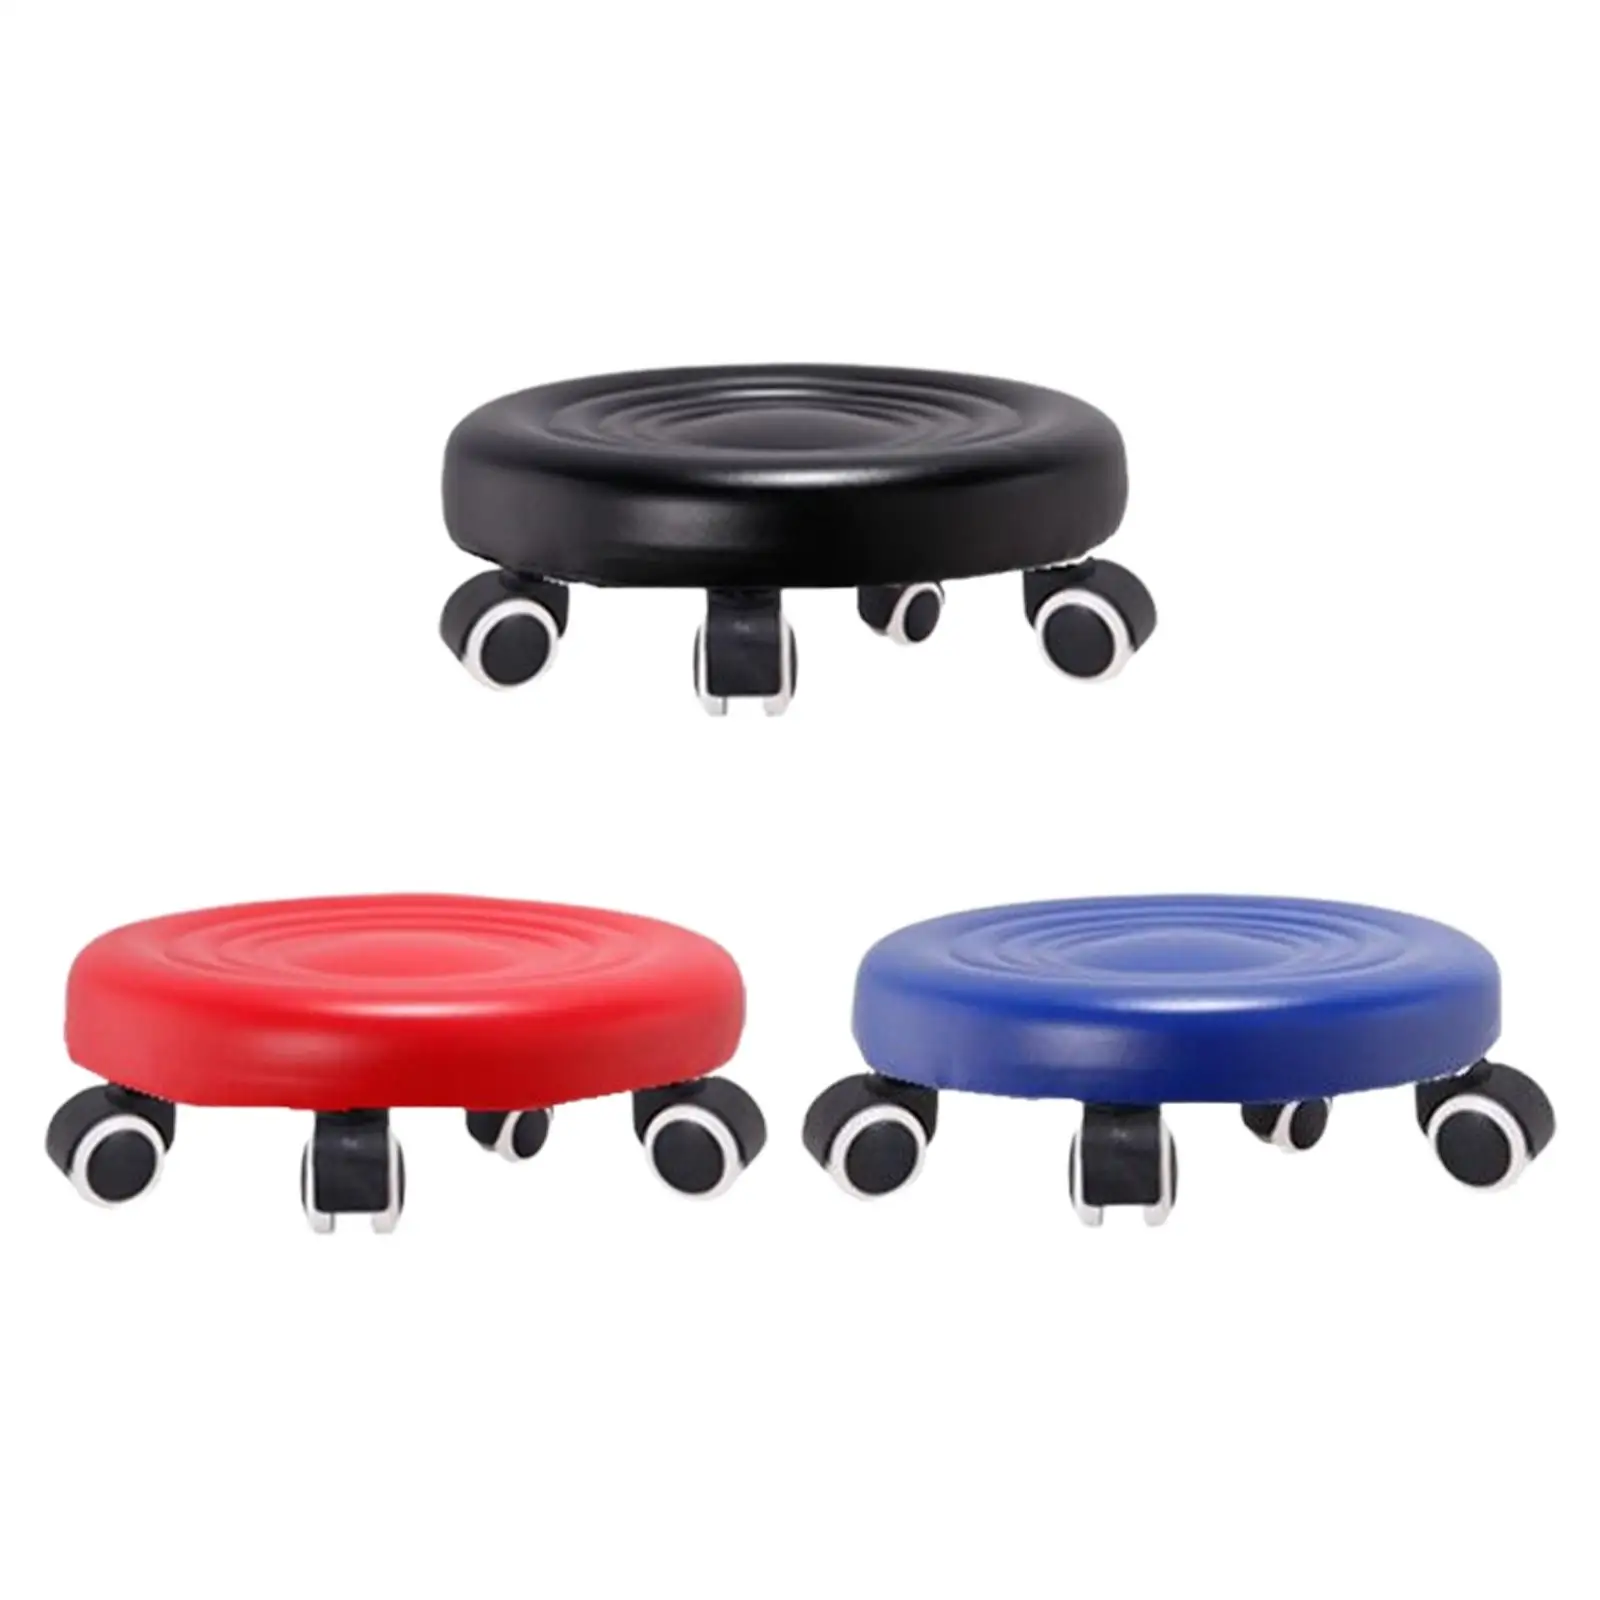 

360° Rotating Rolling Stool Cleaning Floor PU Leather Seat Shoe Changing Low Roller Seat for Salons Library Office Barber Shop